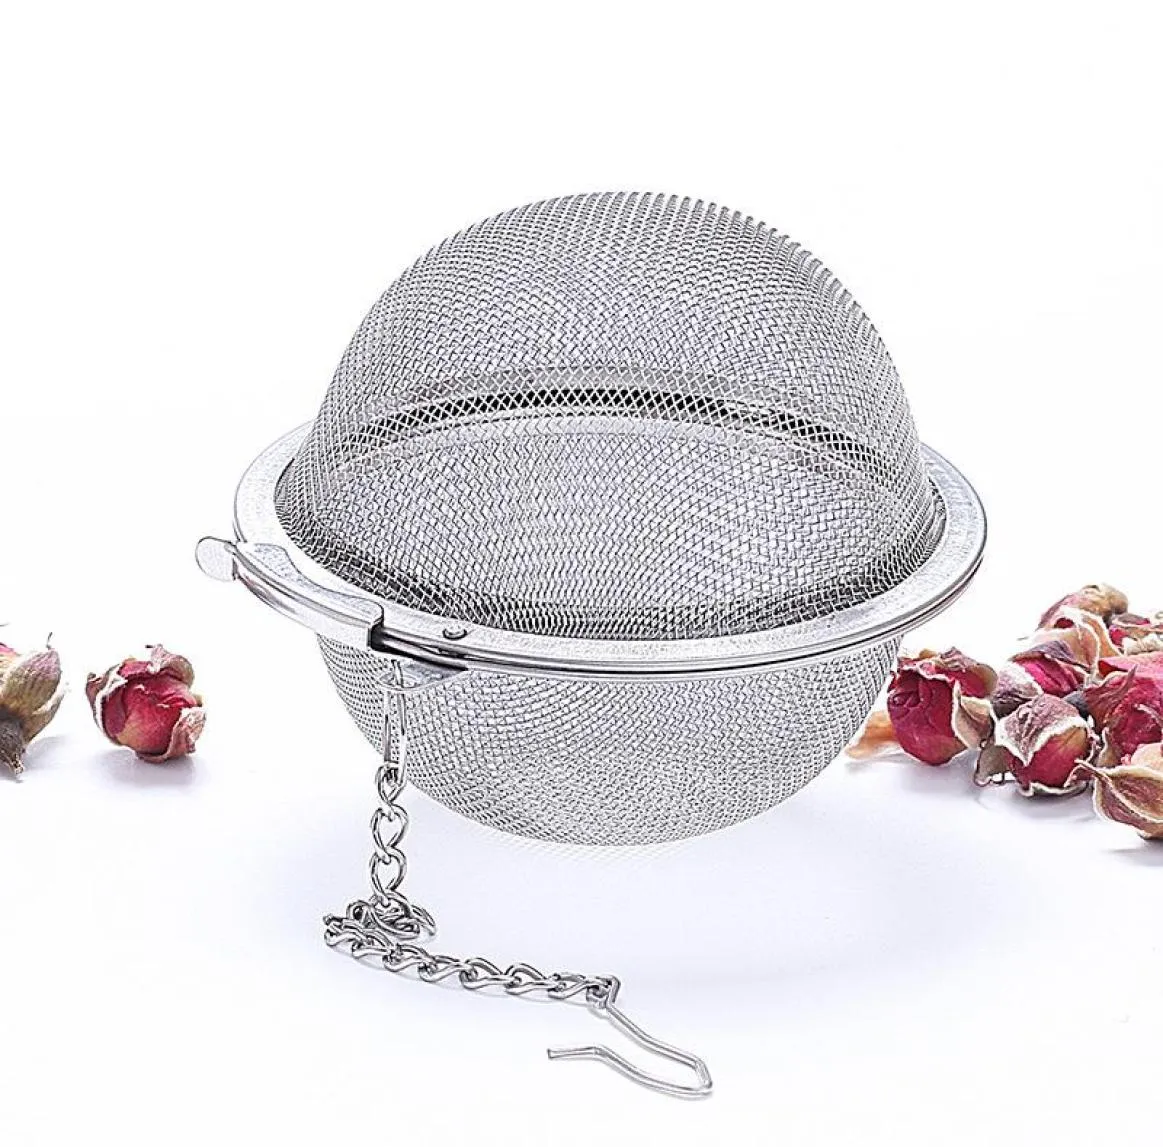 Coffee Tea Tools High Quality Tea Strainer 304 Stainless Steel Tea Pot Infuser Mesh Ball Filter With Chain Tea Maker Tools3484920